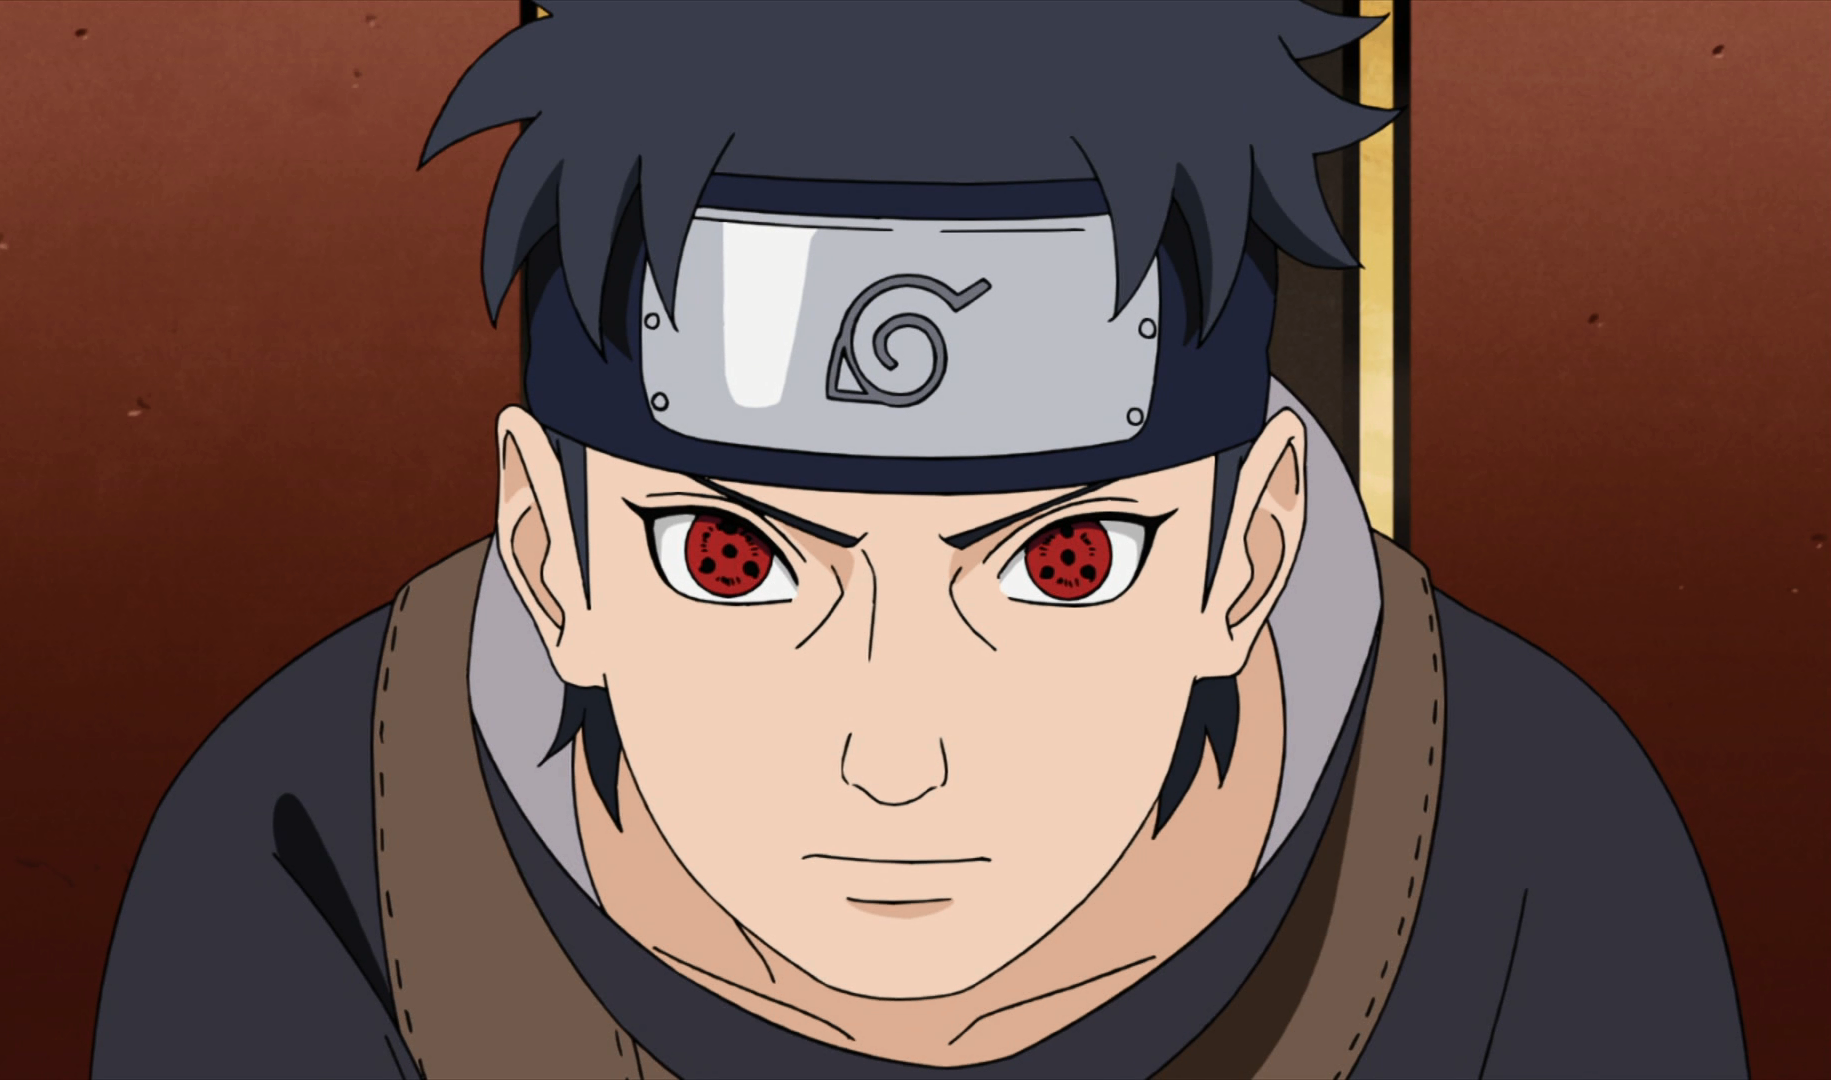 Can we talk about Shisui being the most broken character in the